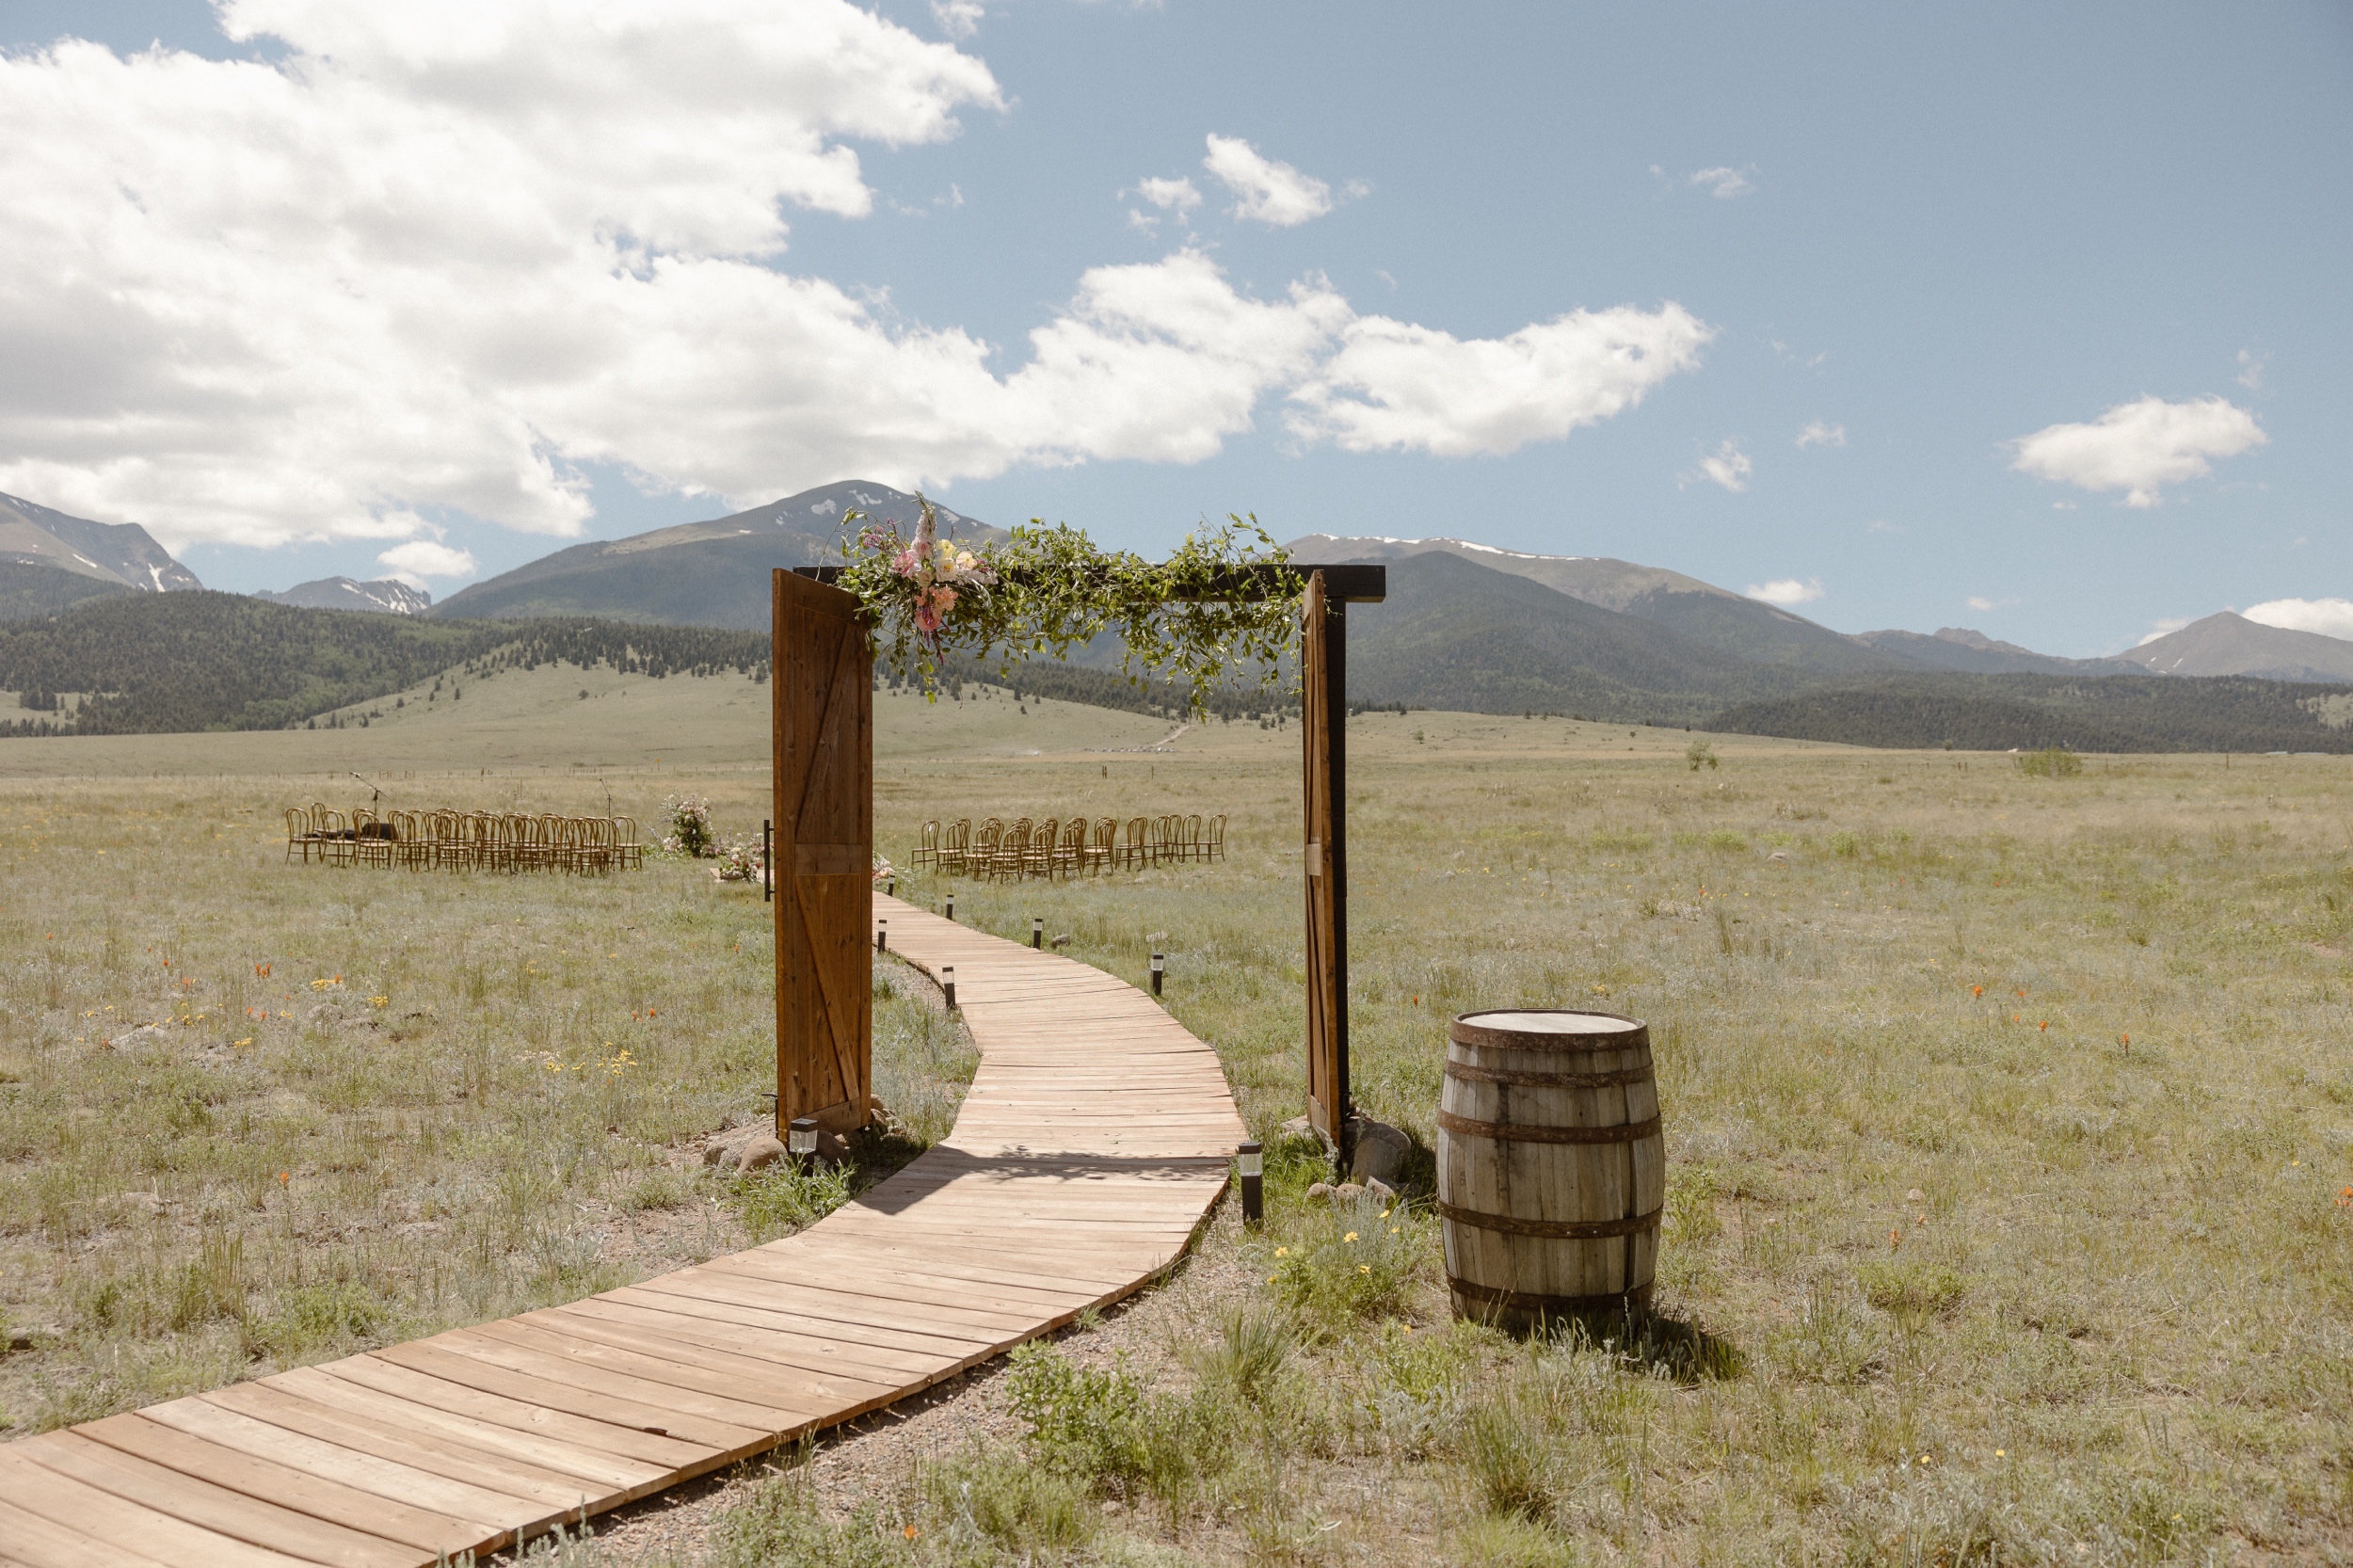 A photo of a wooden arch decorated in flowers and greenery with a minimal ceremony setup in the background for a Three Peaks Ranch wedding. Photo by Ashley Joyce.